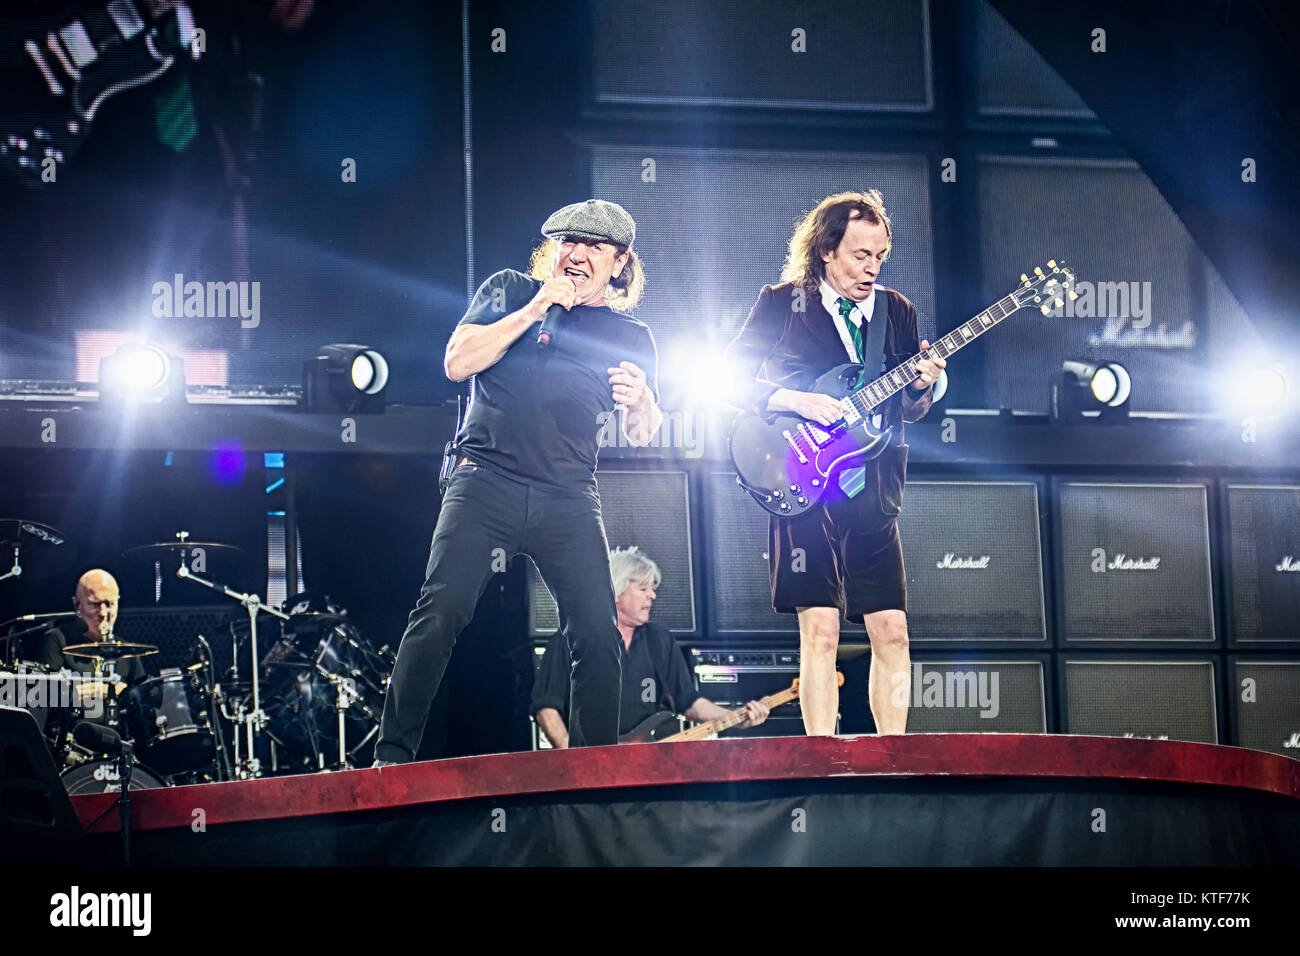 Ac dc concert hi-res stock and images - Alamy